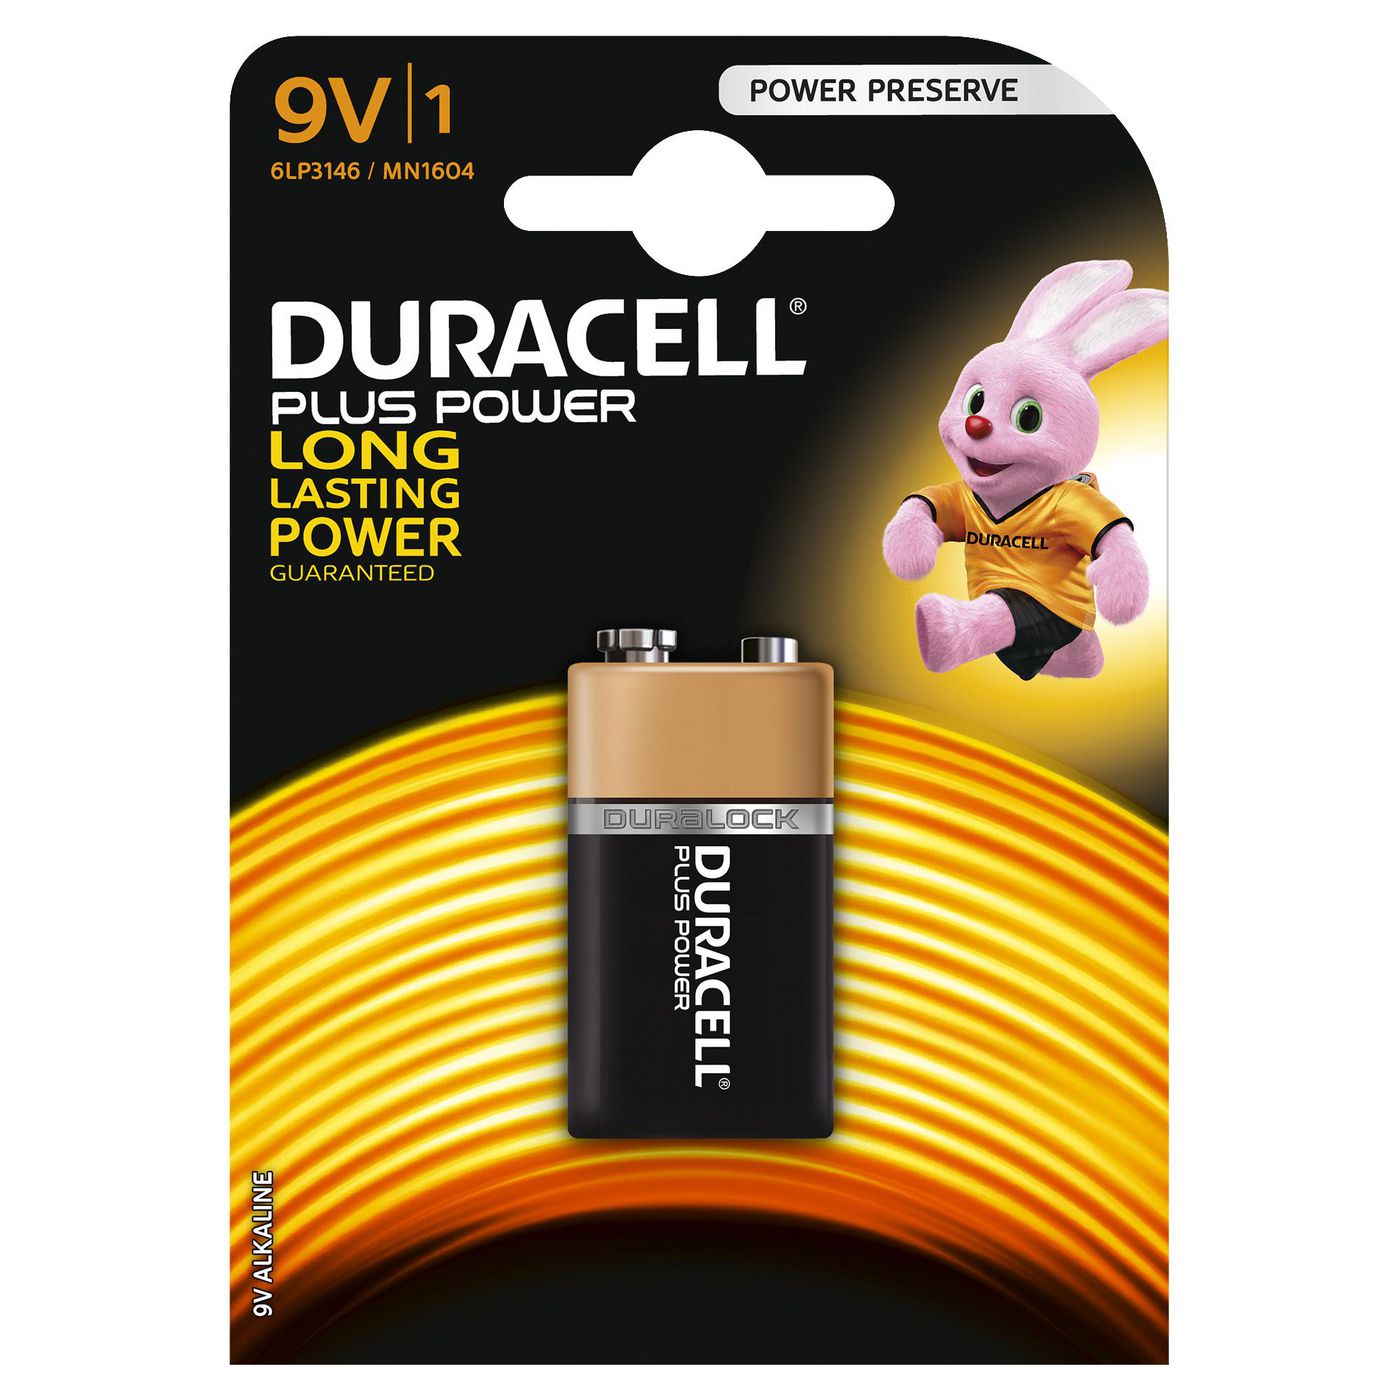 Duracell 5000394105485 W128822622 Plus 100 Single-Use Battery 